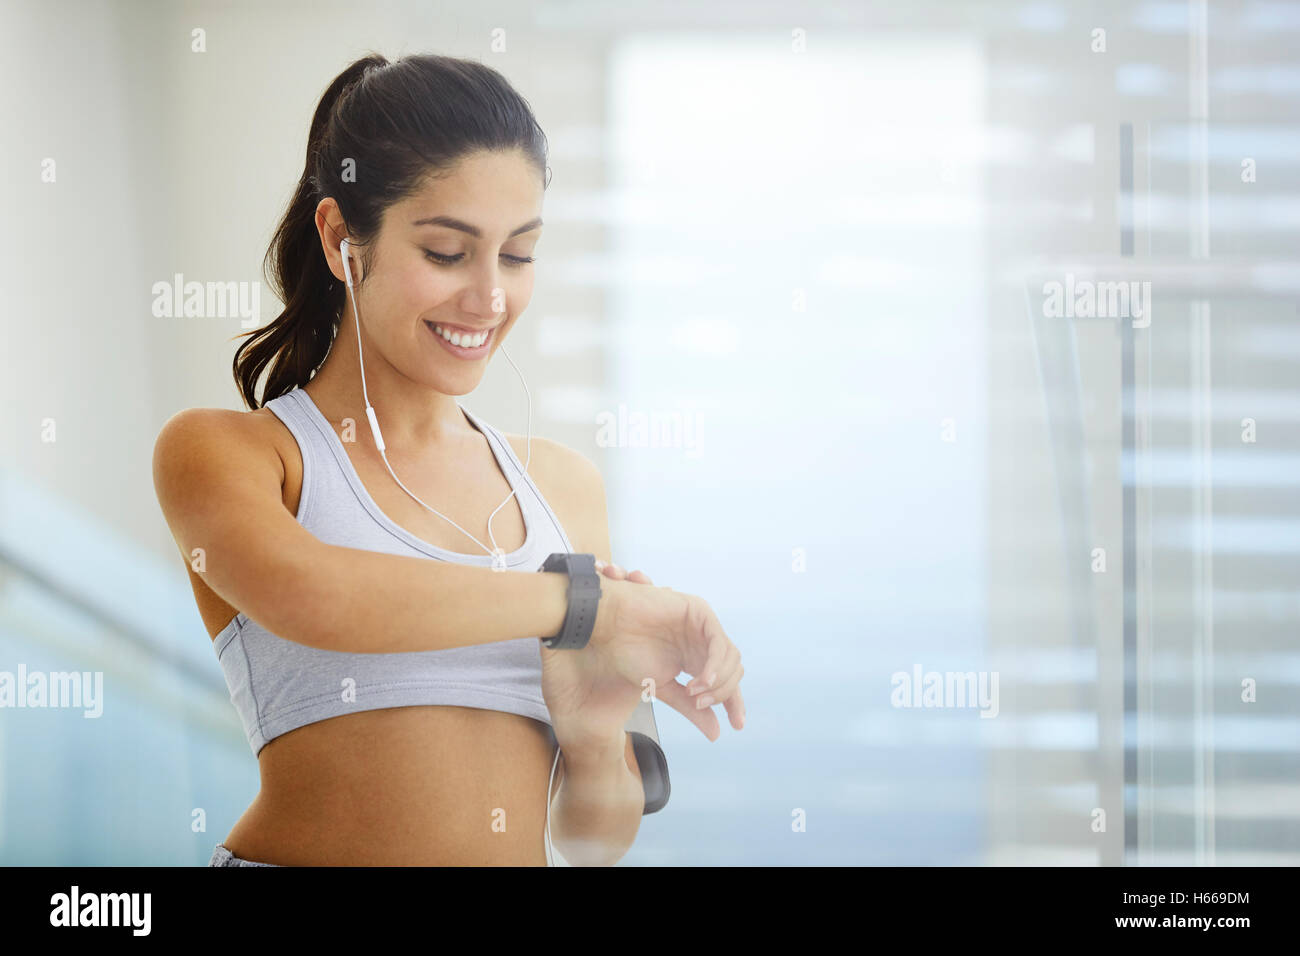 Woman exercising with headphones checking smart watch Stock Photo